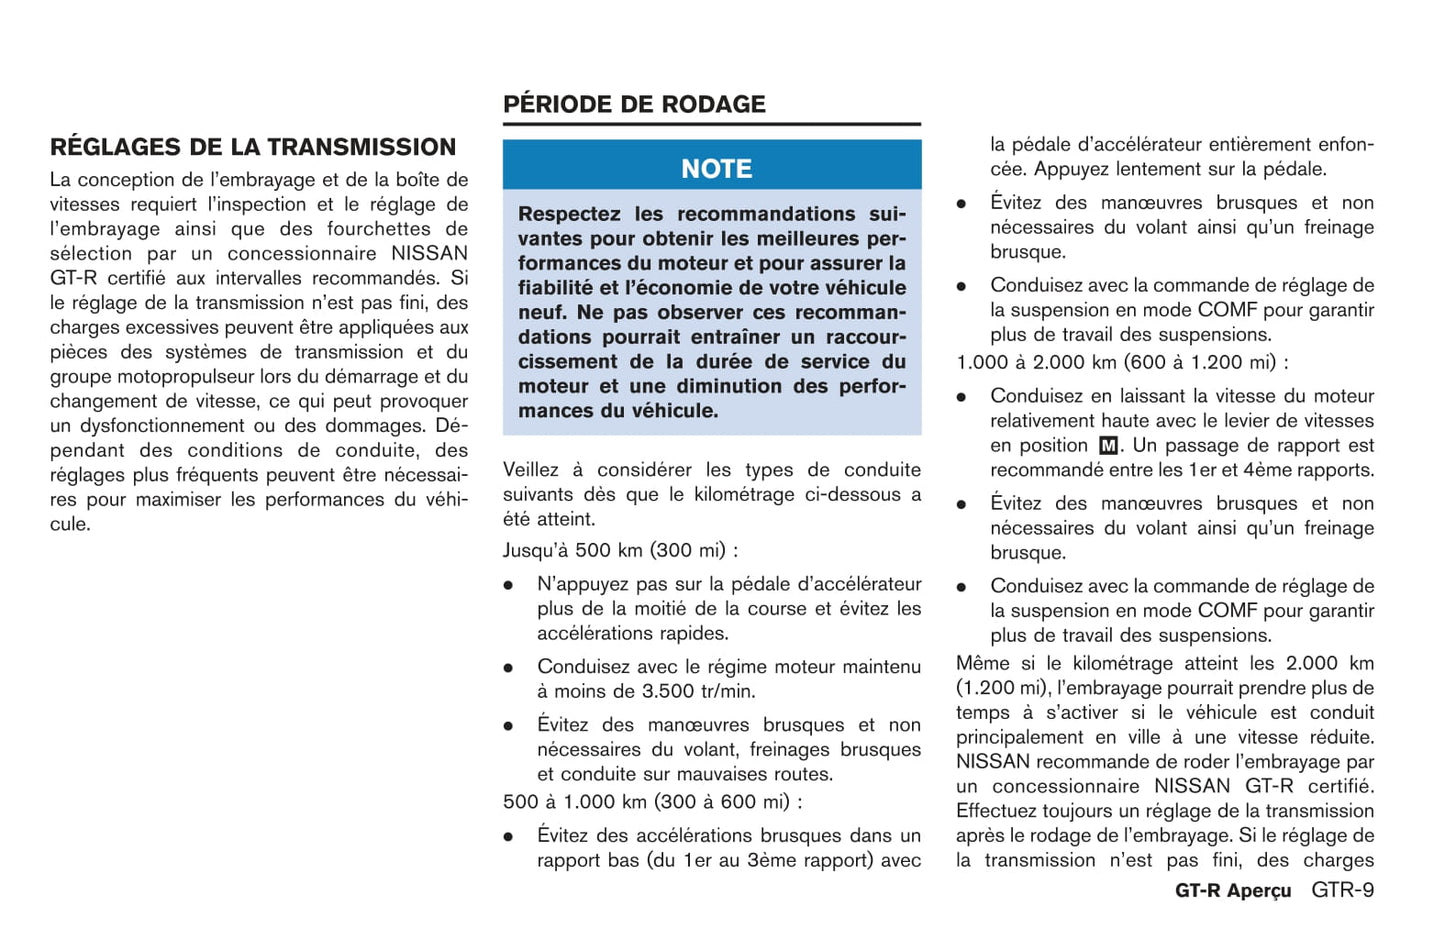 2015 Nissan GT-R Owner's Manual | French